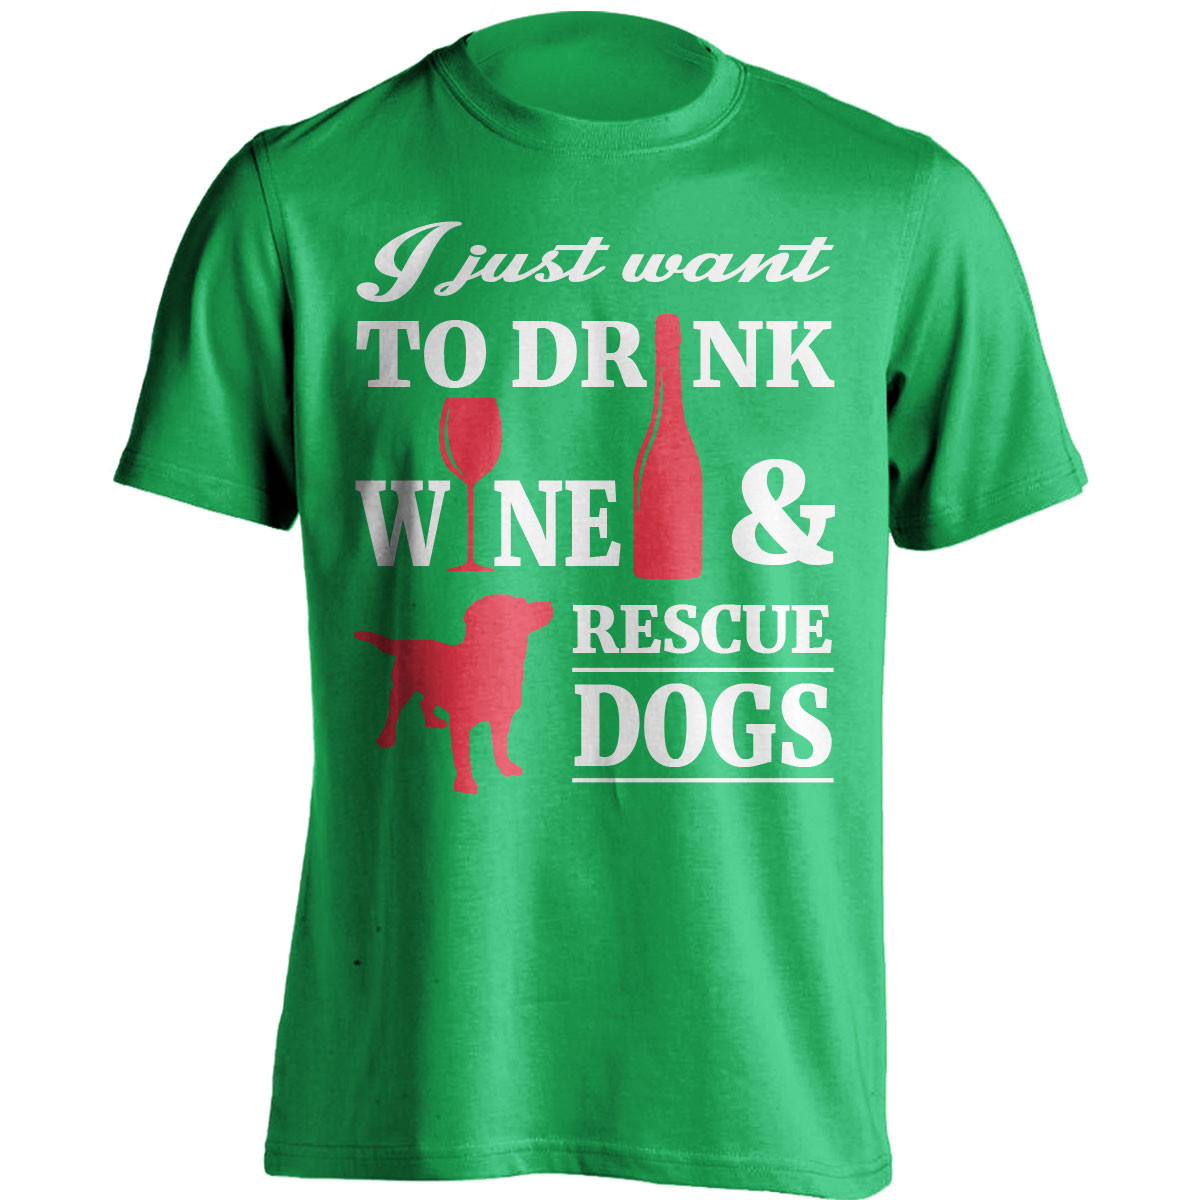 "I Just Want To Drink Wine And Rescue Dogs" T-Shirt